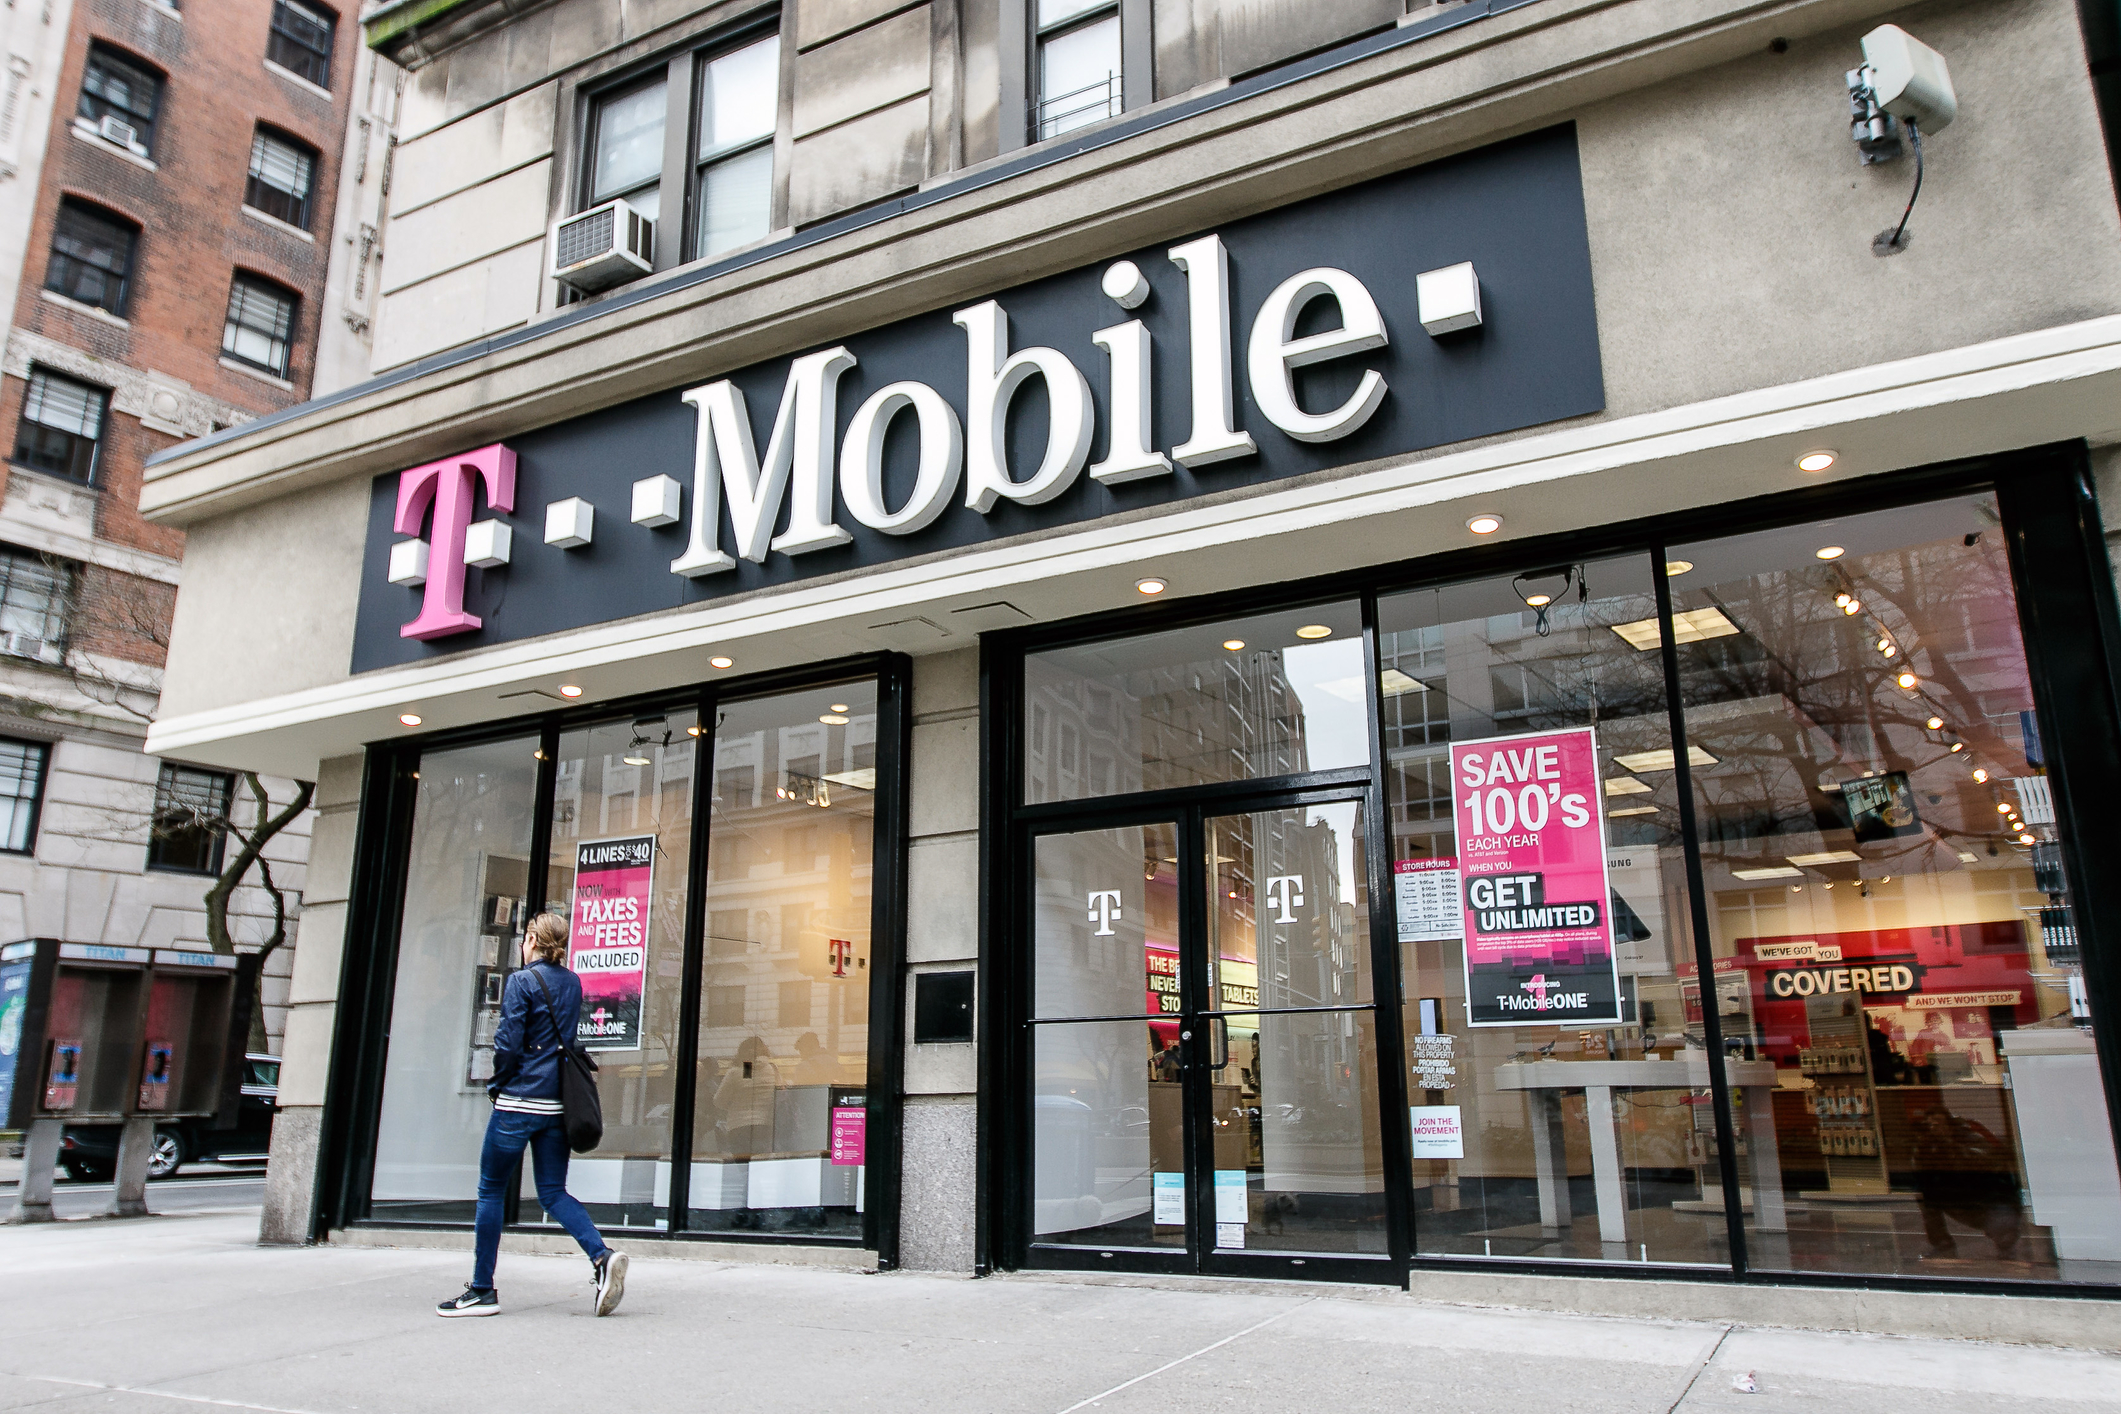 T-Mobile Cyber Monday deals: Get a FREE smartphone via monthly bill credits